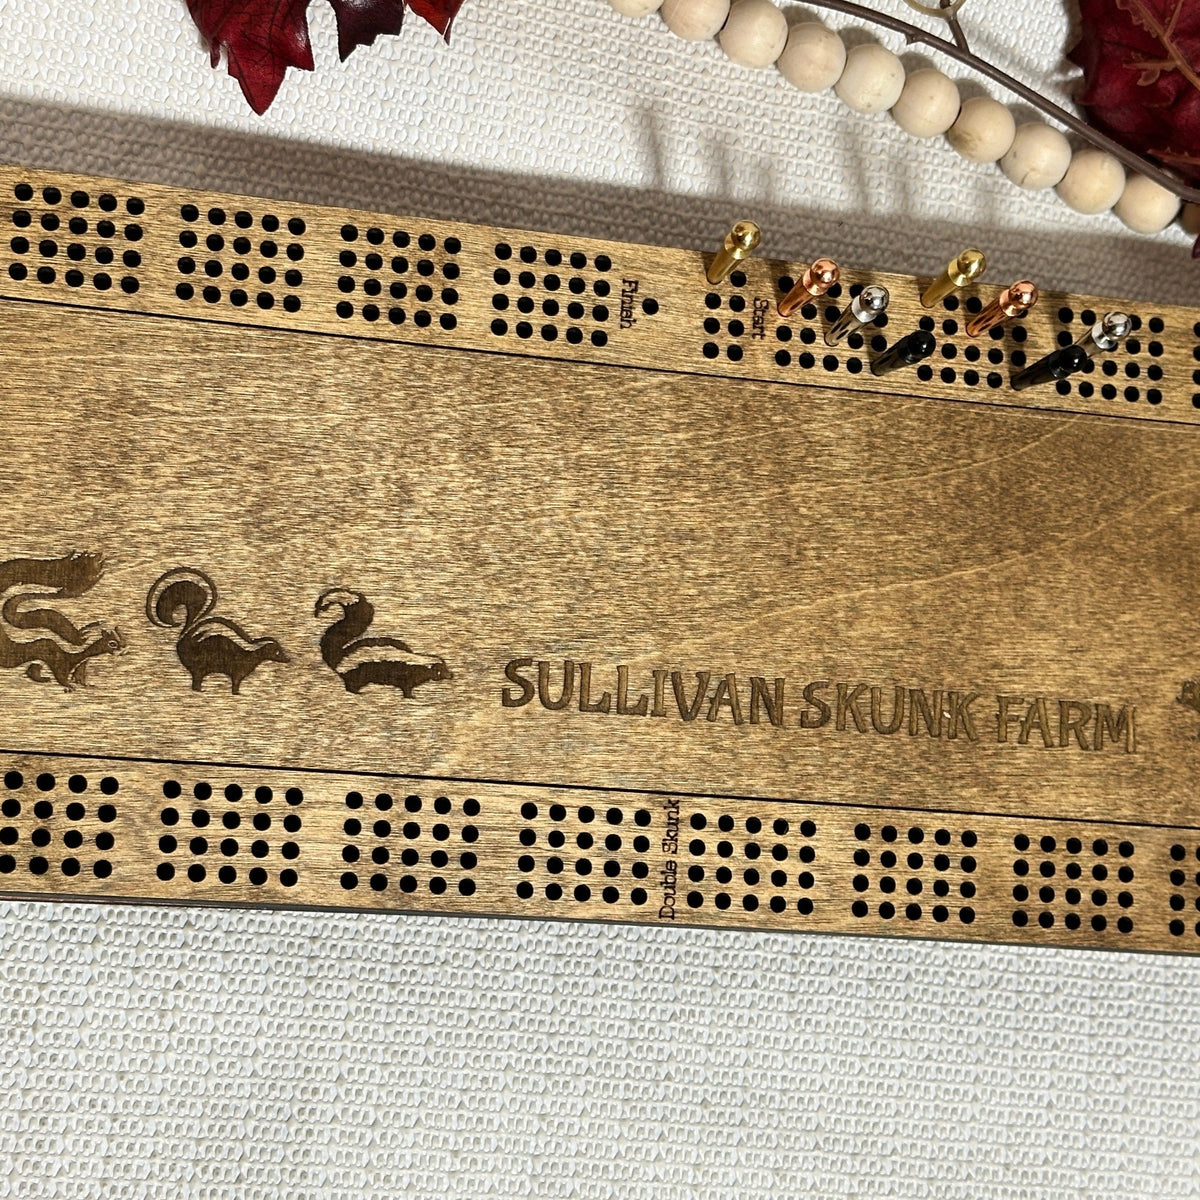 Personalized Cribbage Board with Metal Pegs and Scoring Board